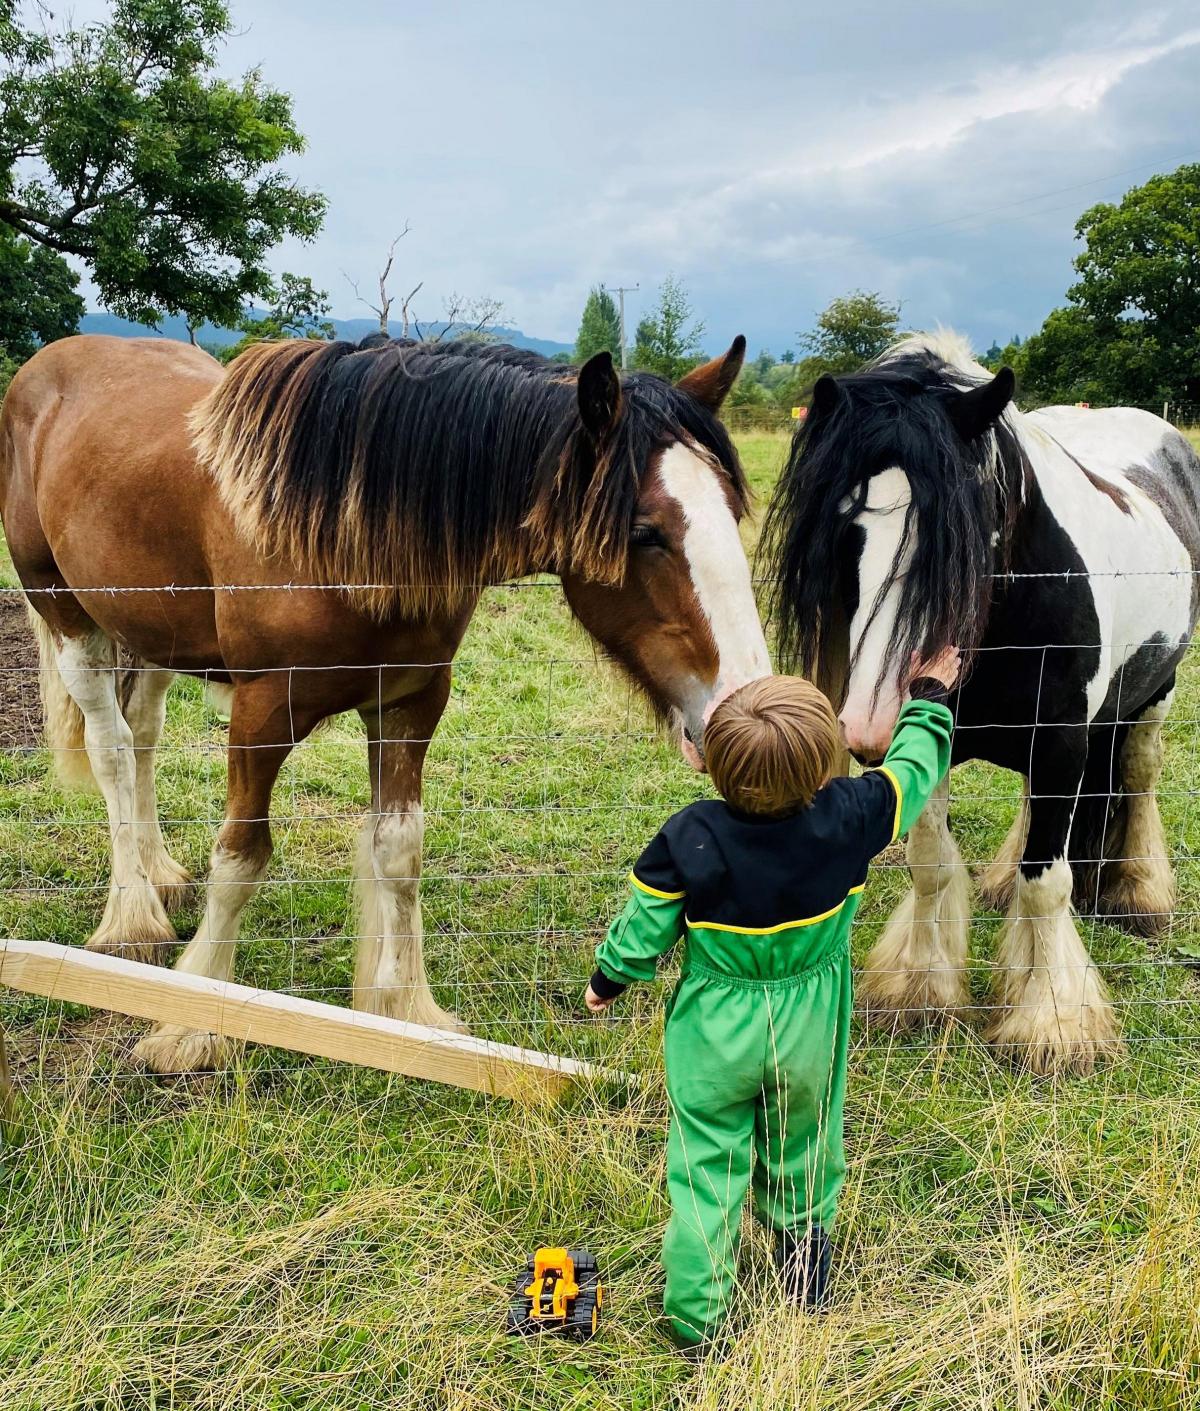 Dawn Holmes - My little one stopping for a pat of the ponies while out on the farm playing with his toy tractor.